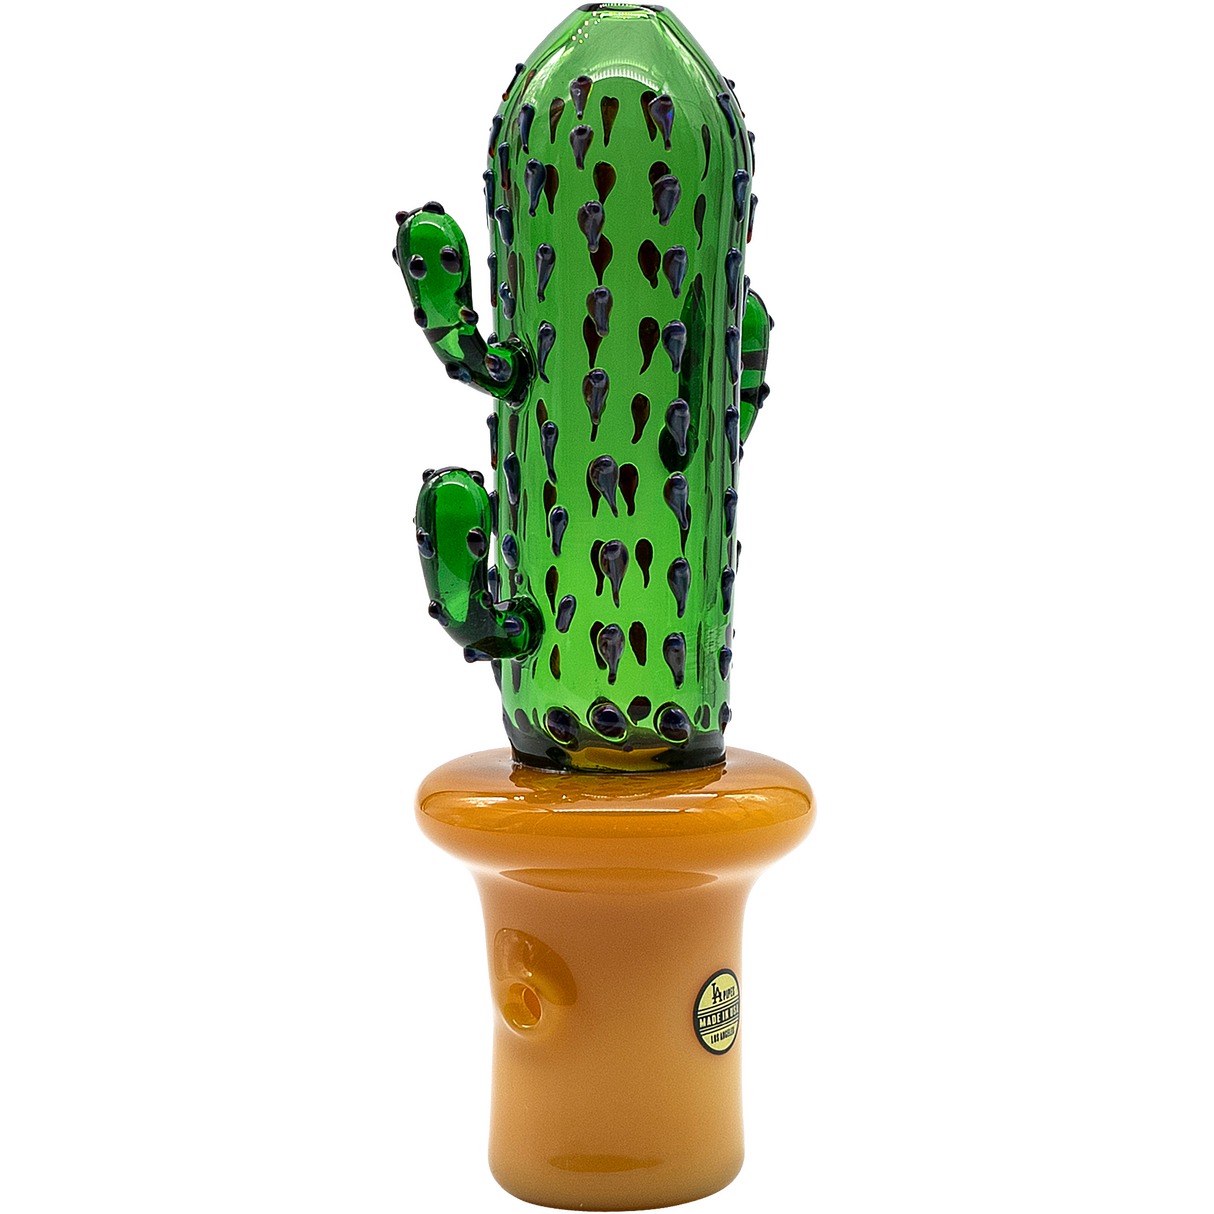 LA Pipes Glass Saguaro Cactus Pipe in green, 5" spoon design, front view on white background